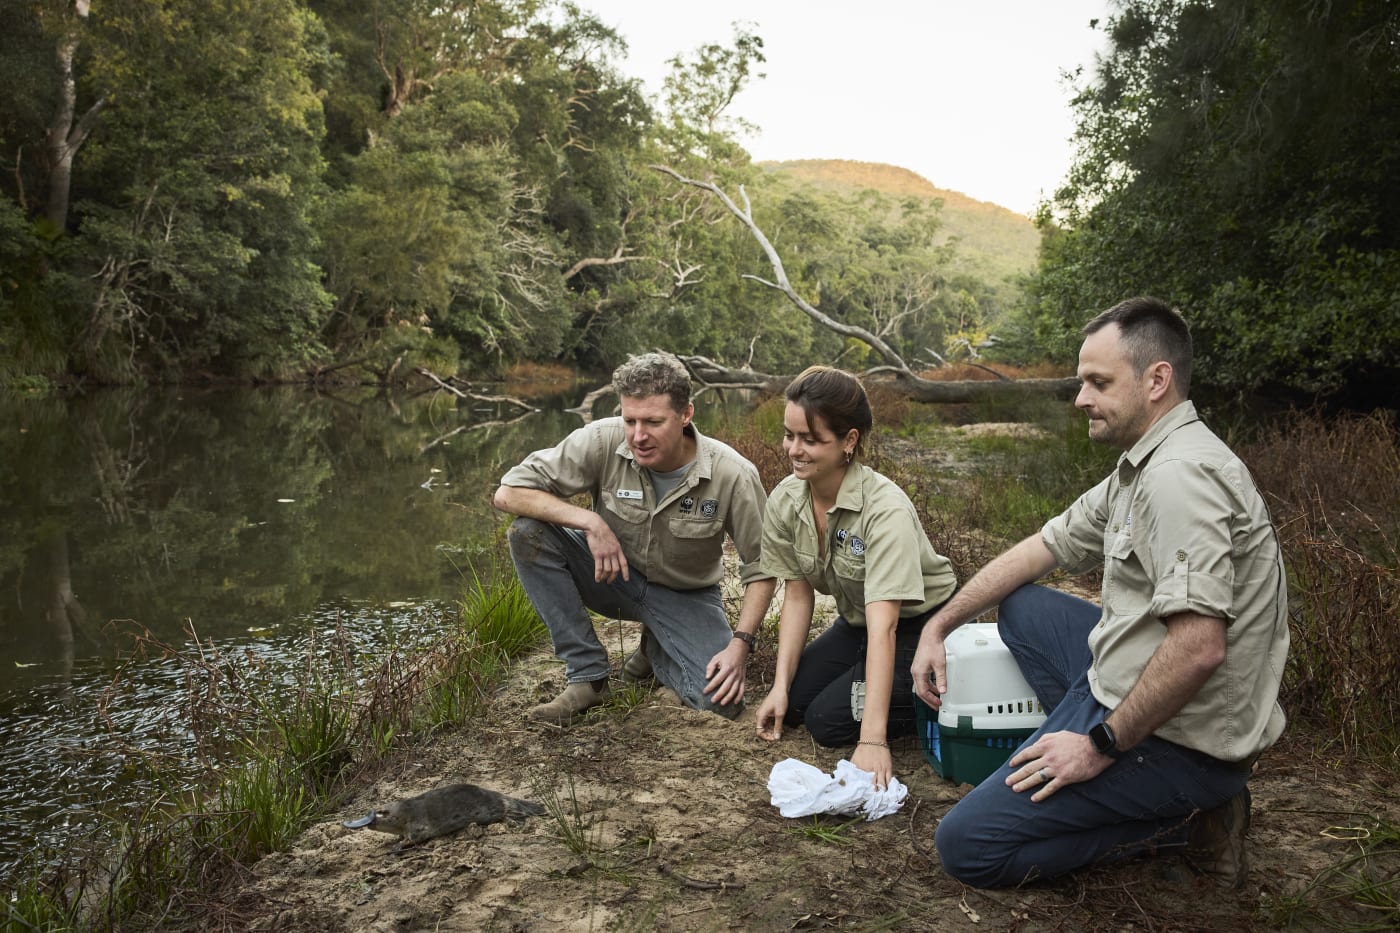 Rob Brewster, Fran Roncolato, and Patrick Giumelli from WWF-Australia release a platypus back into the Royal National Park